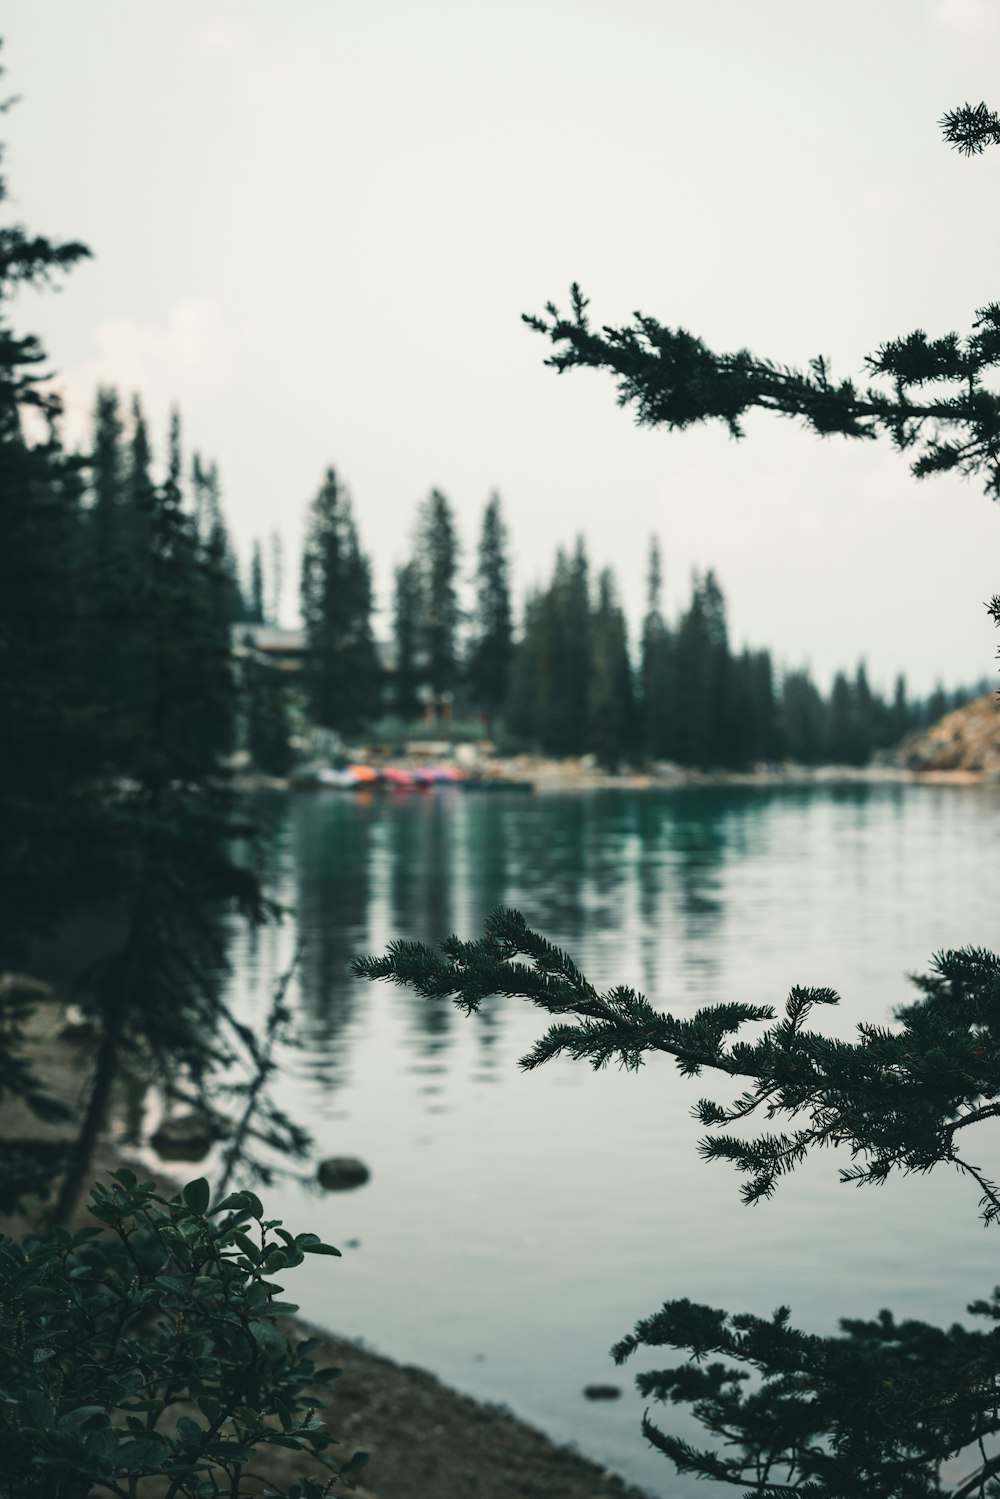 a body of water surrounded by pine trees